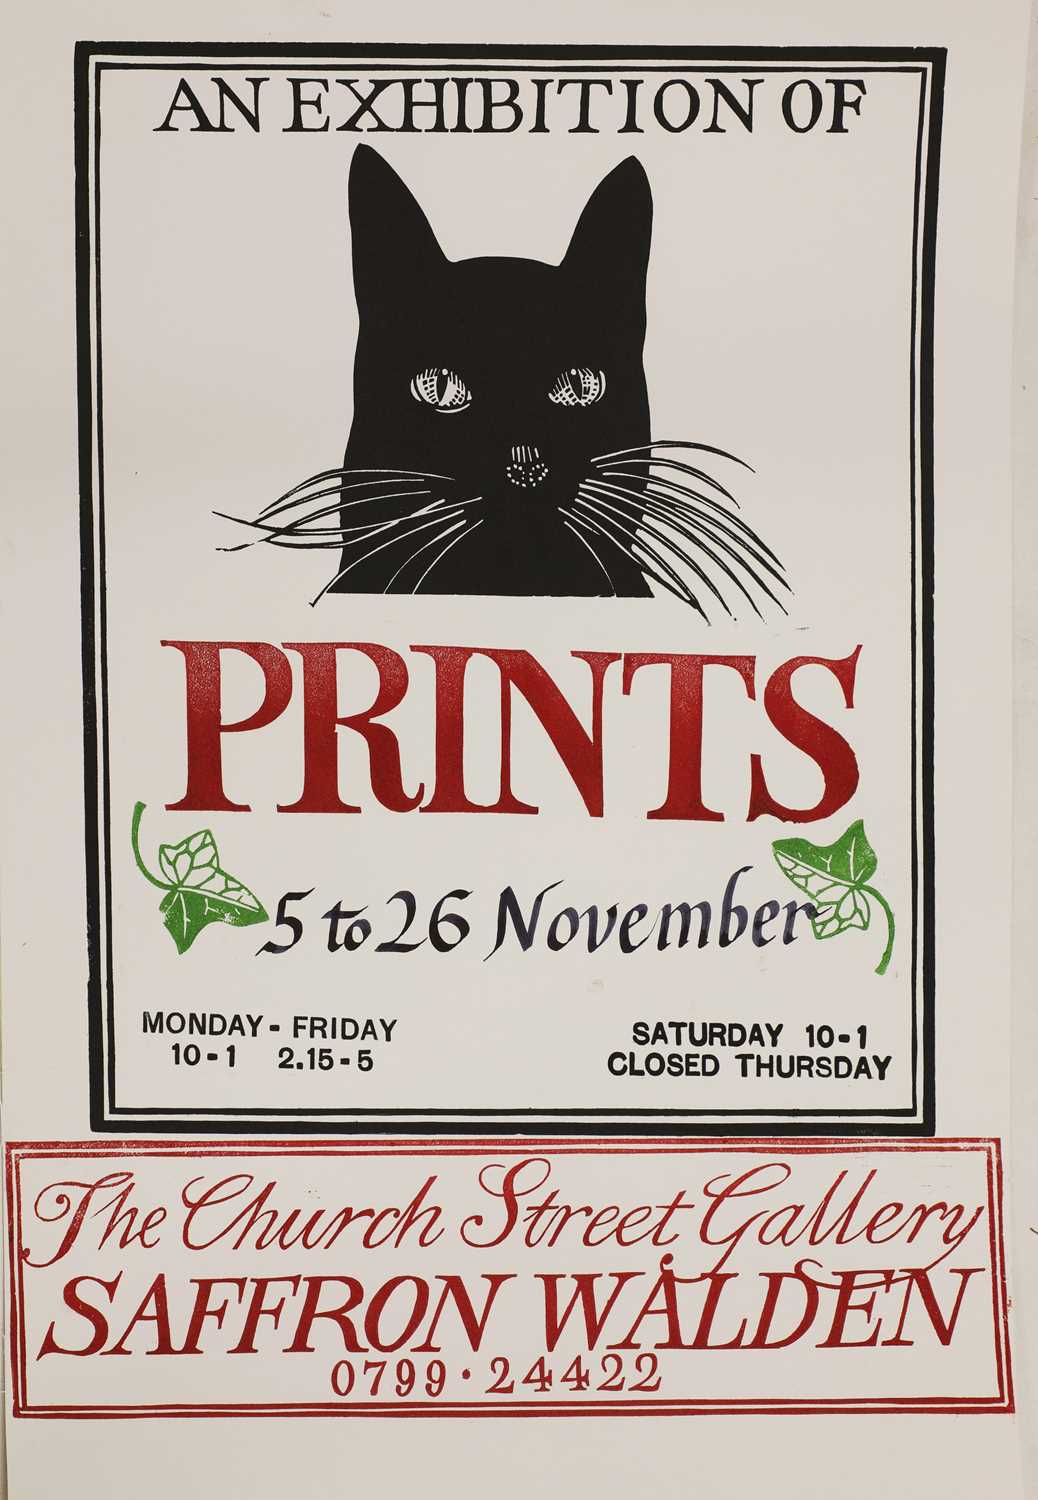 Exhibition poster for Richard Bawden at the Church Street Gallery, Saffron Walden - Image 5 of 8